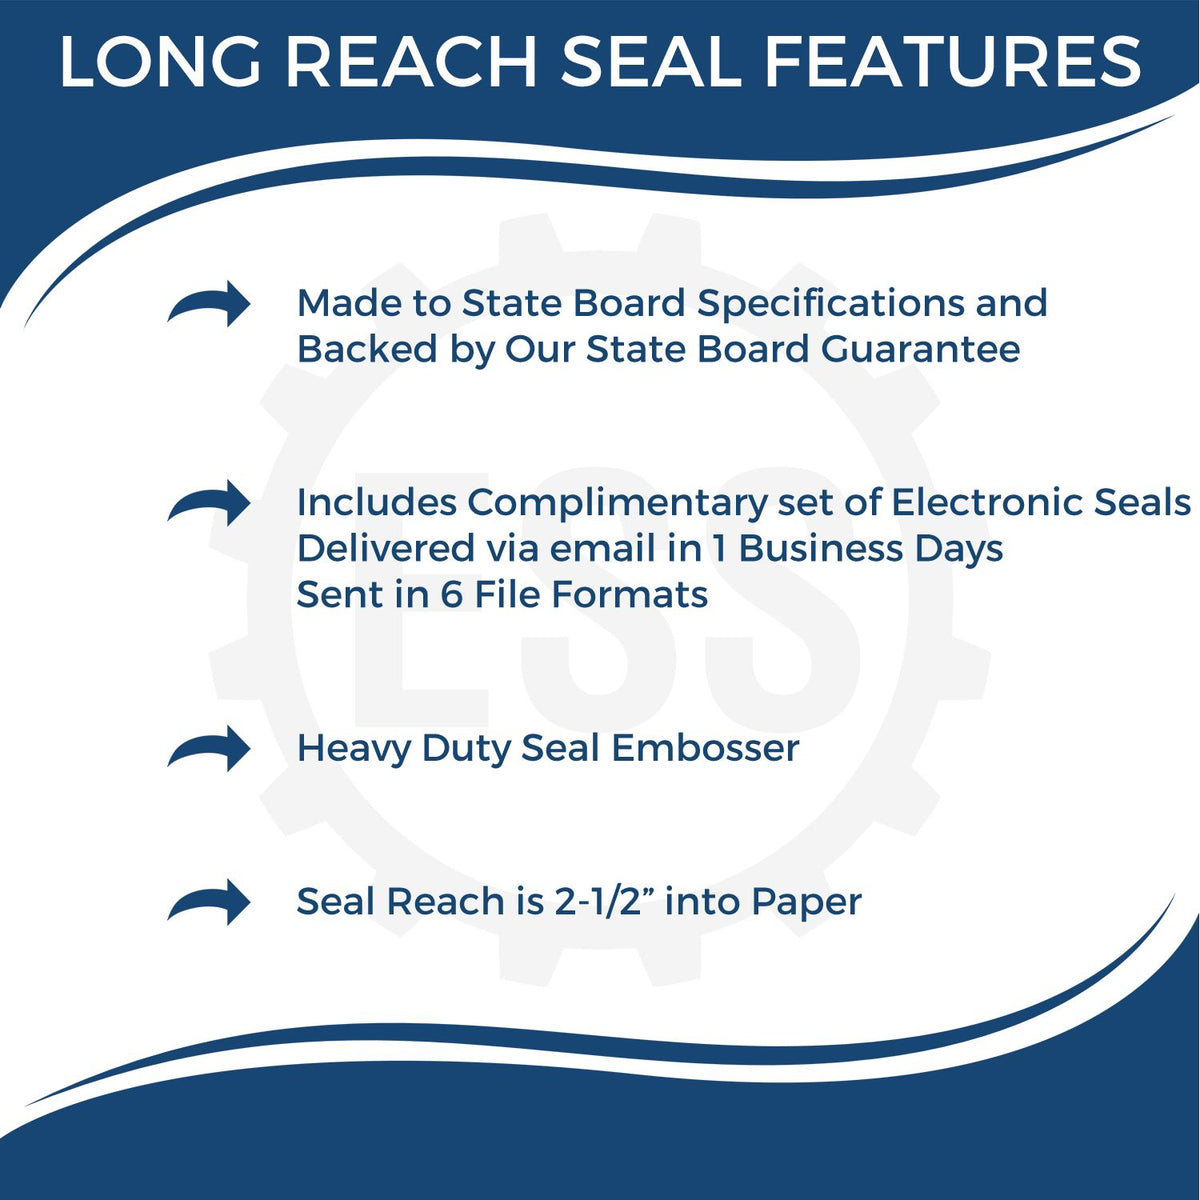 A picture of an infographic highlighting the selling points for the Long Reach Louisiana Geology Seal